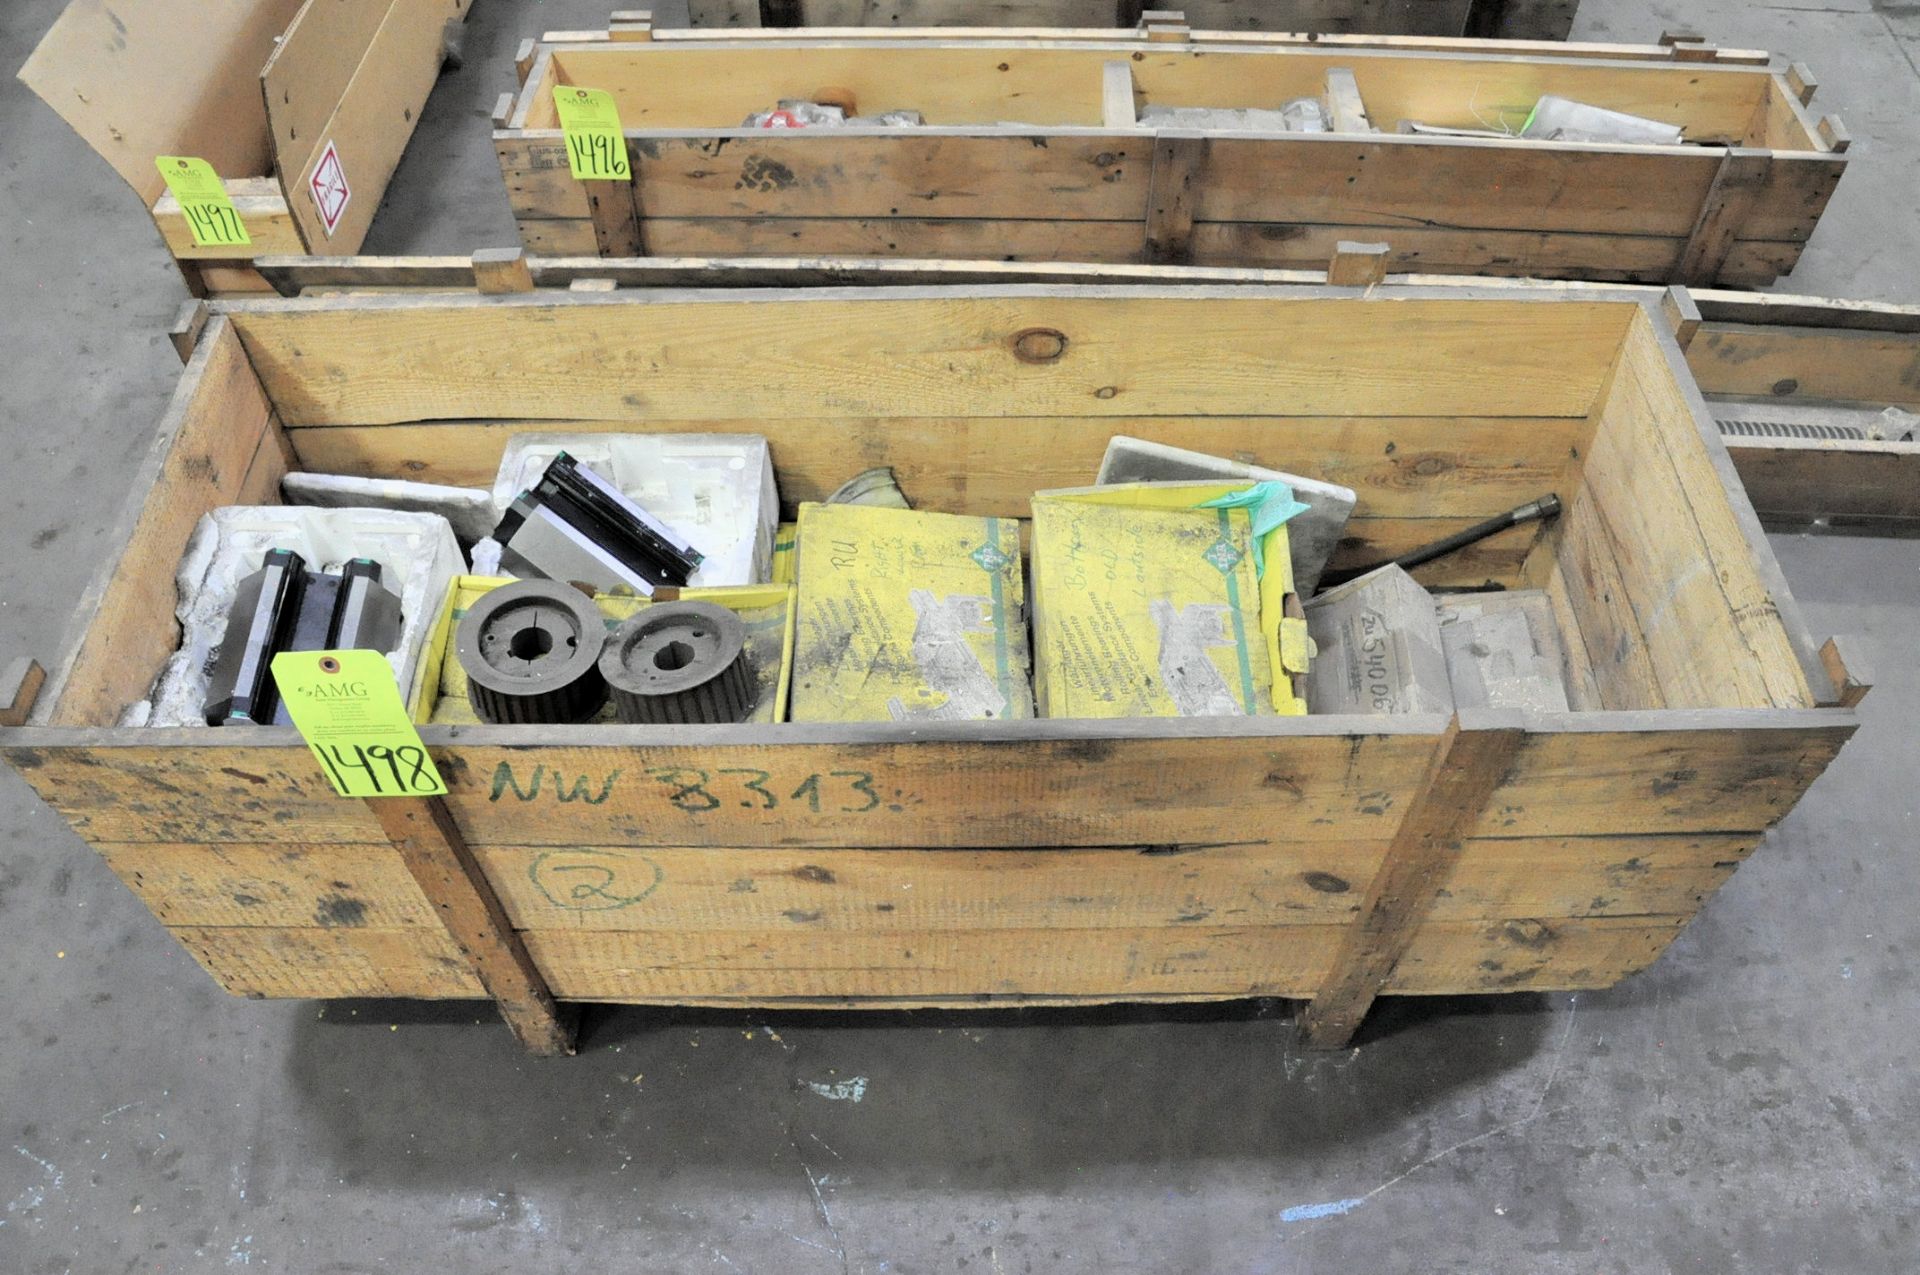 Lot-Asst'd Tooling in (1) Crate, (D-17), (Yellow Tag)